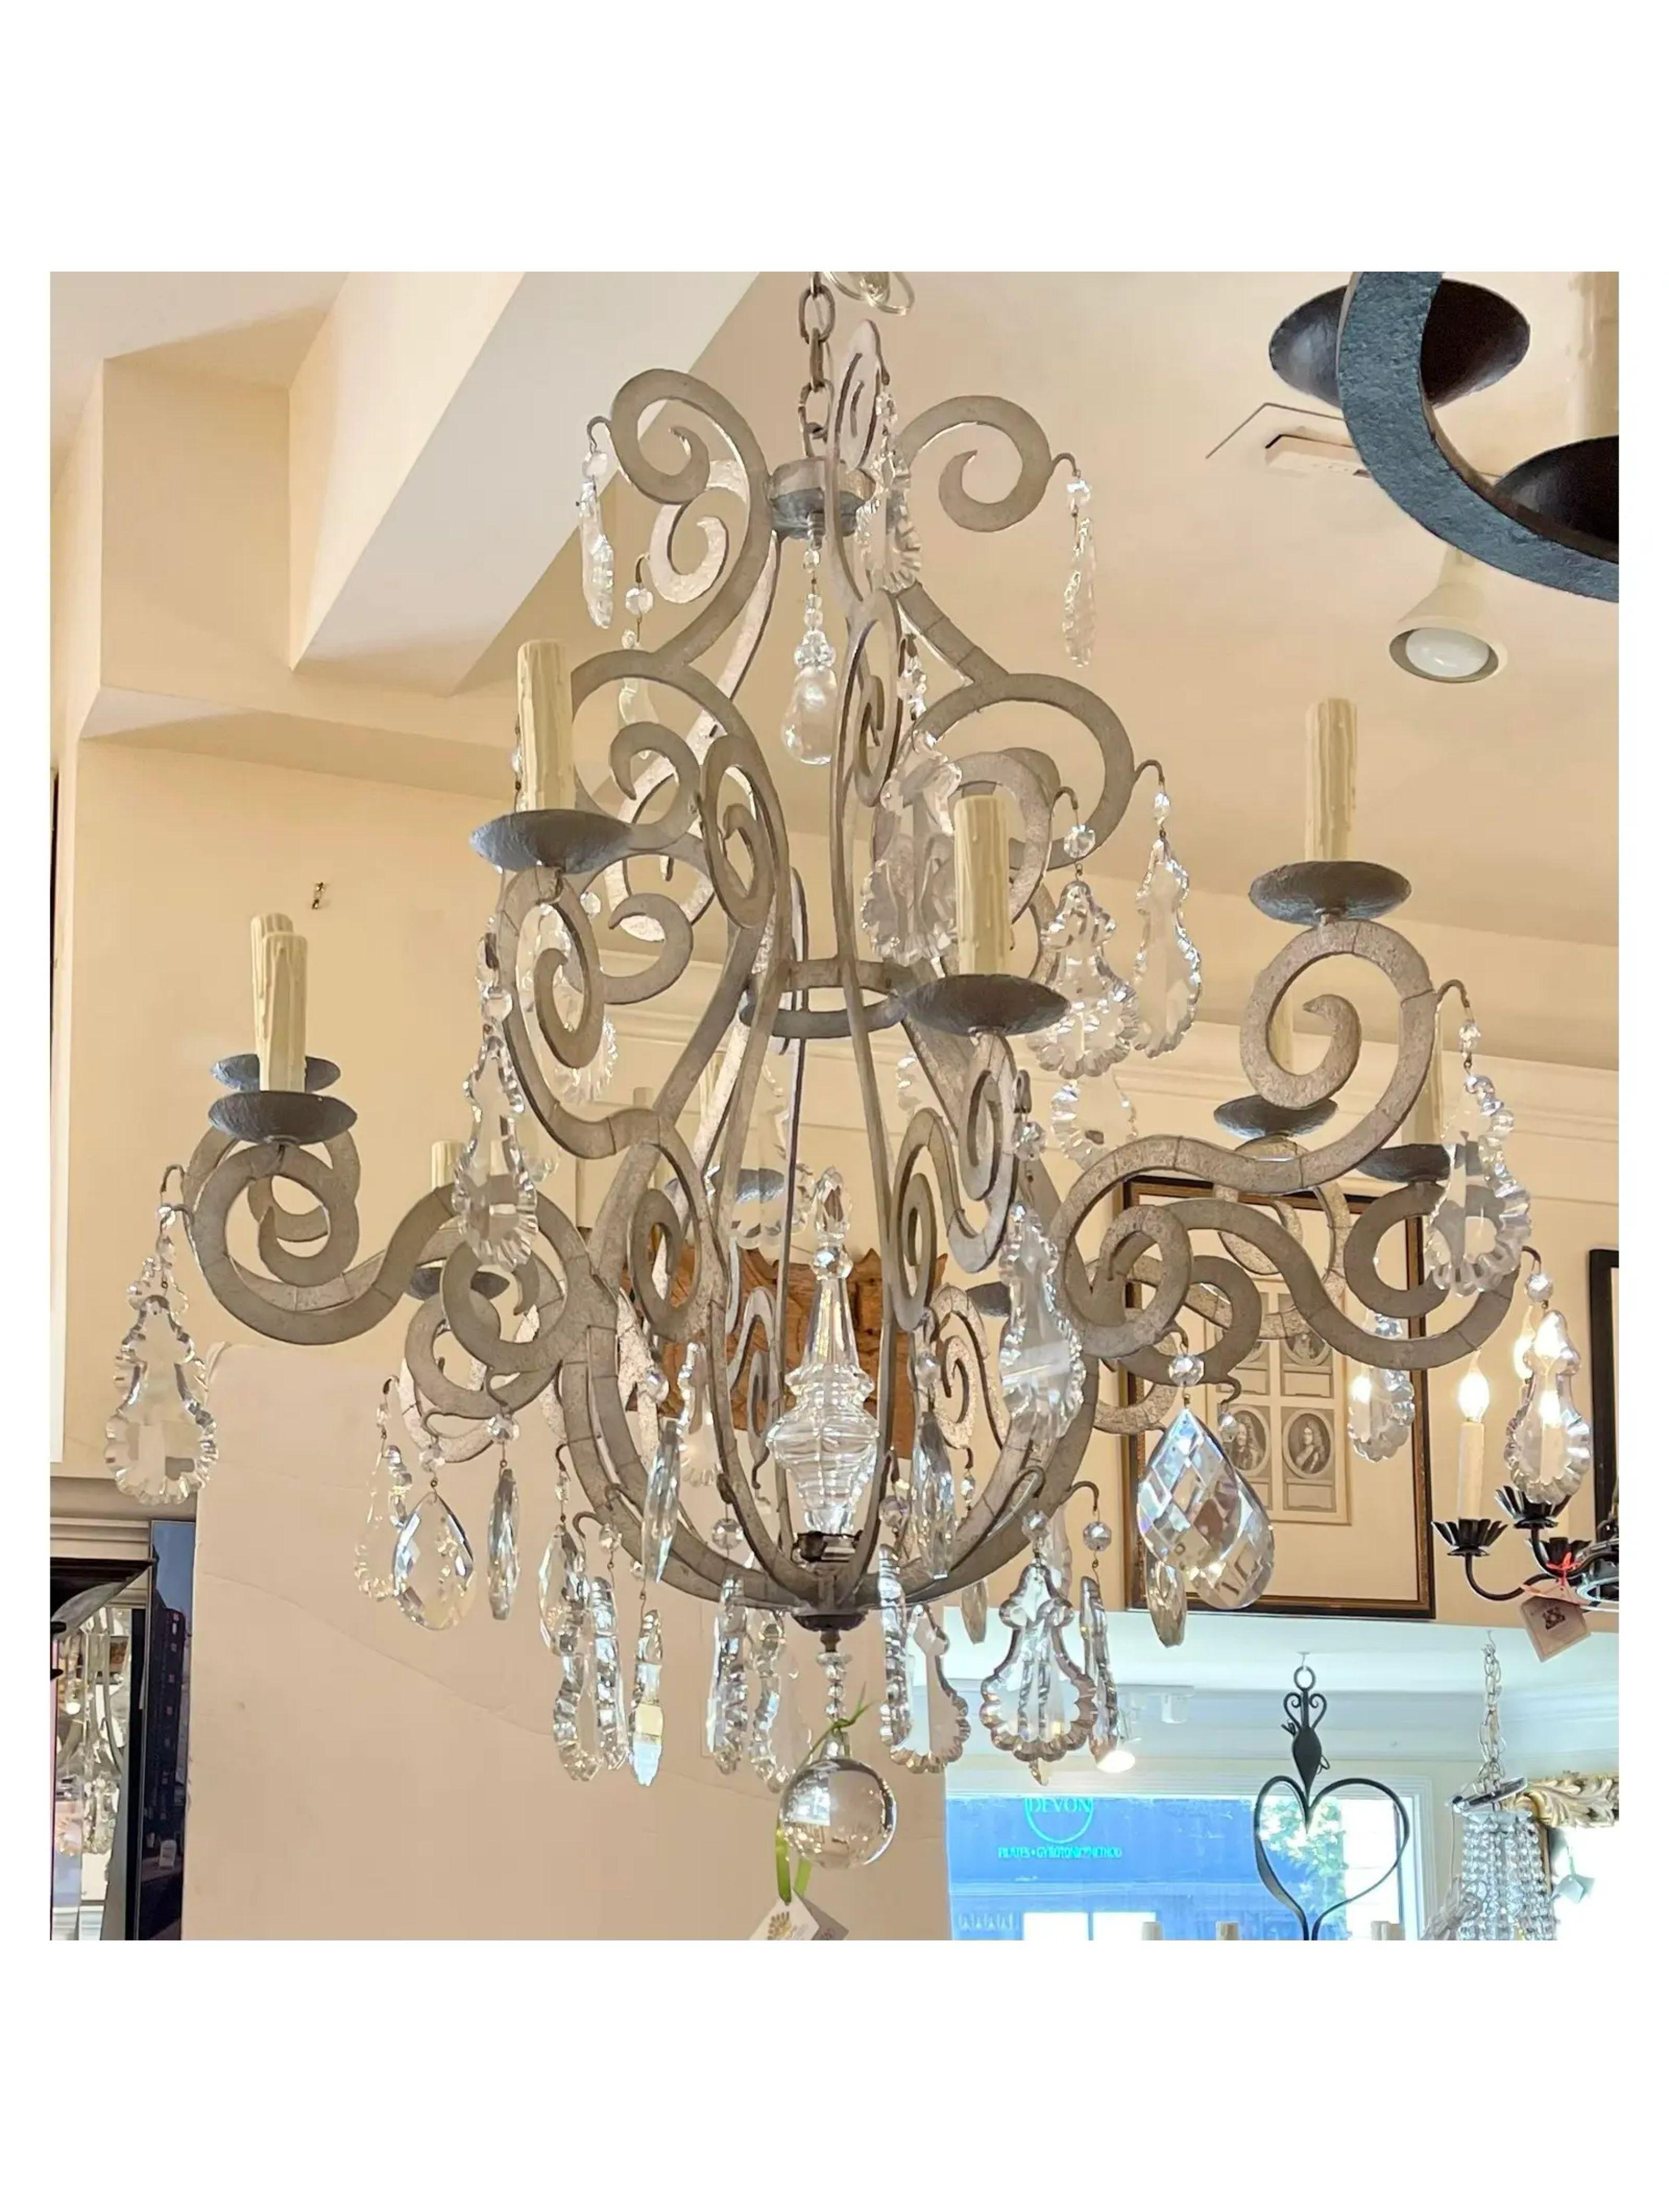 Paul Ferrante Silver Metal & French Crystal Chandelier. Featuring a rock crystal peat as the upper centerpiece and thick high quality French crystals throughout.

Additional information: 
Materials: Crystal, Silver
Color: Silver
Brand: Paul